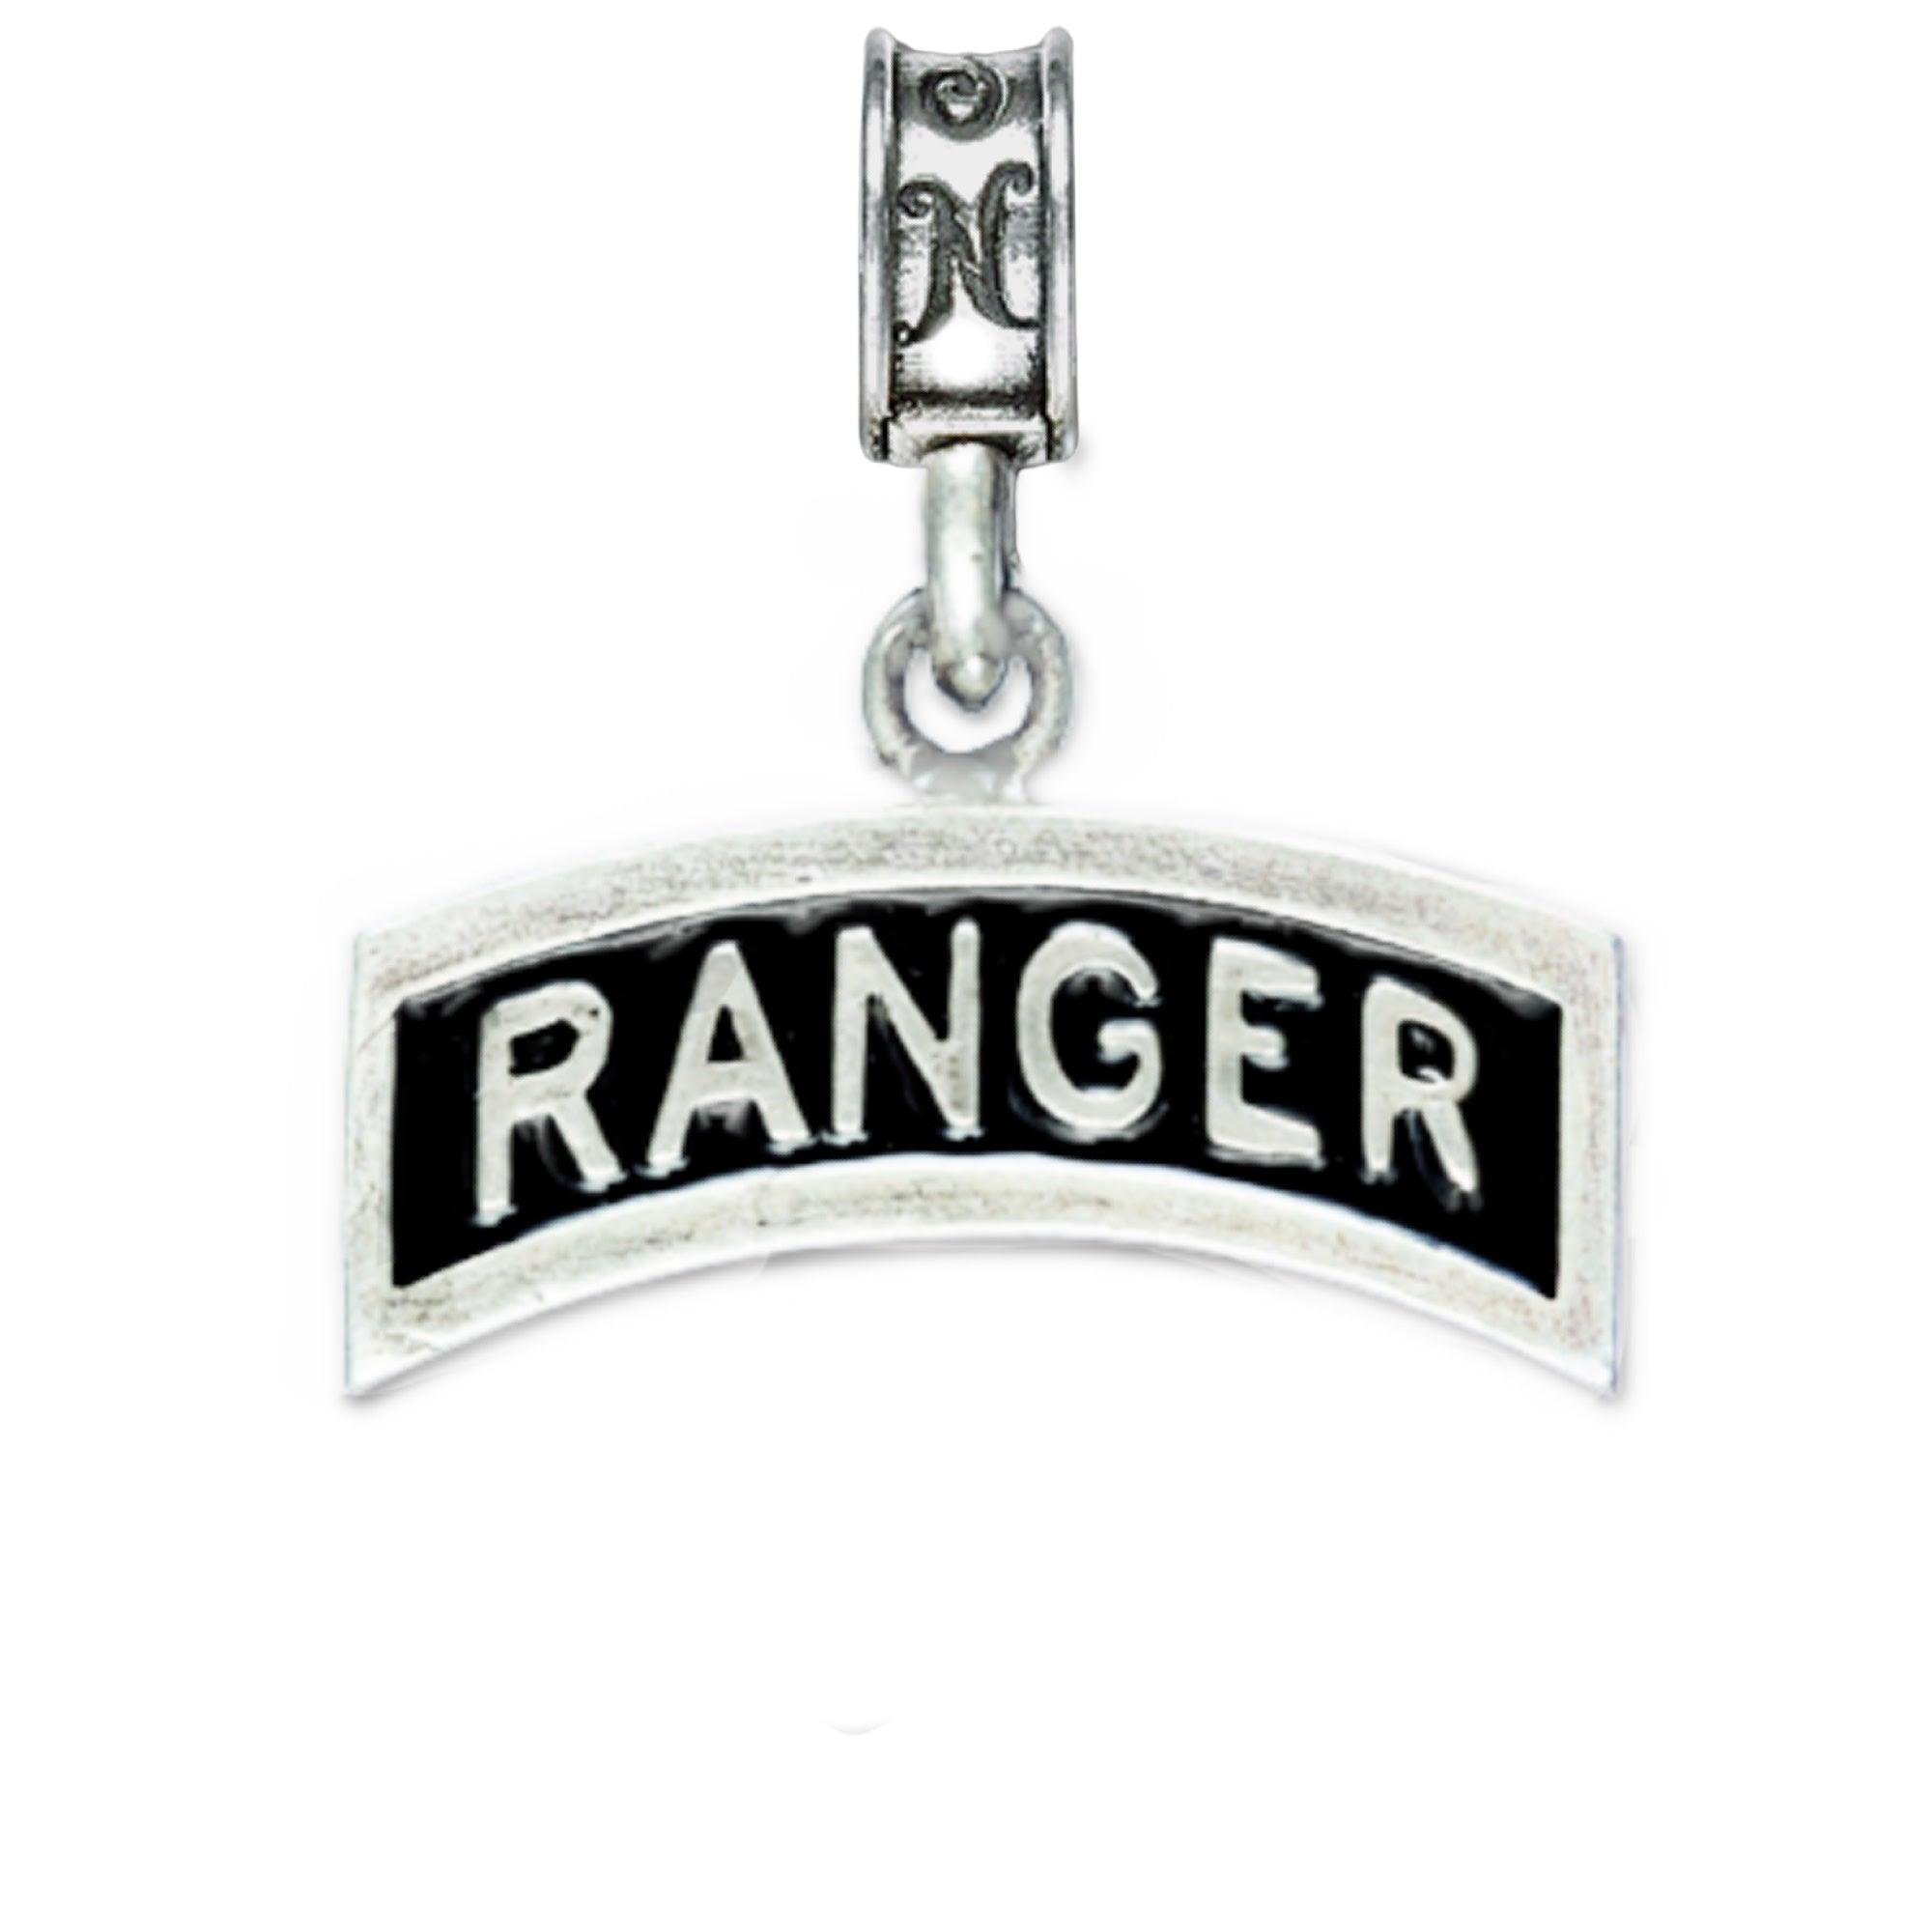 Military Jewelry, Military Charms, United States Army, Military Gifts, Ranger Tab Charm